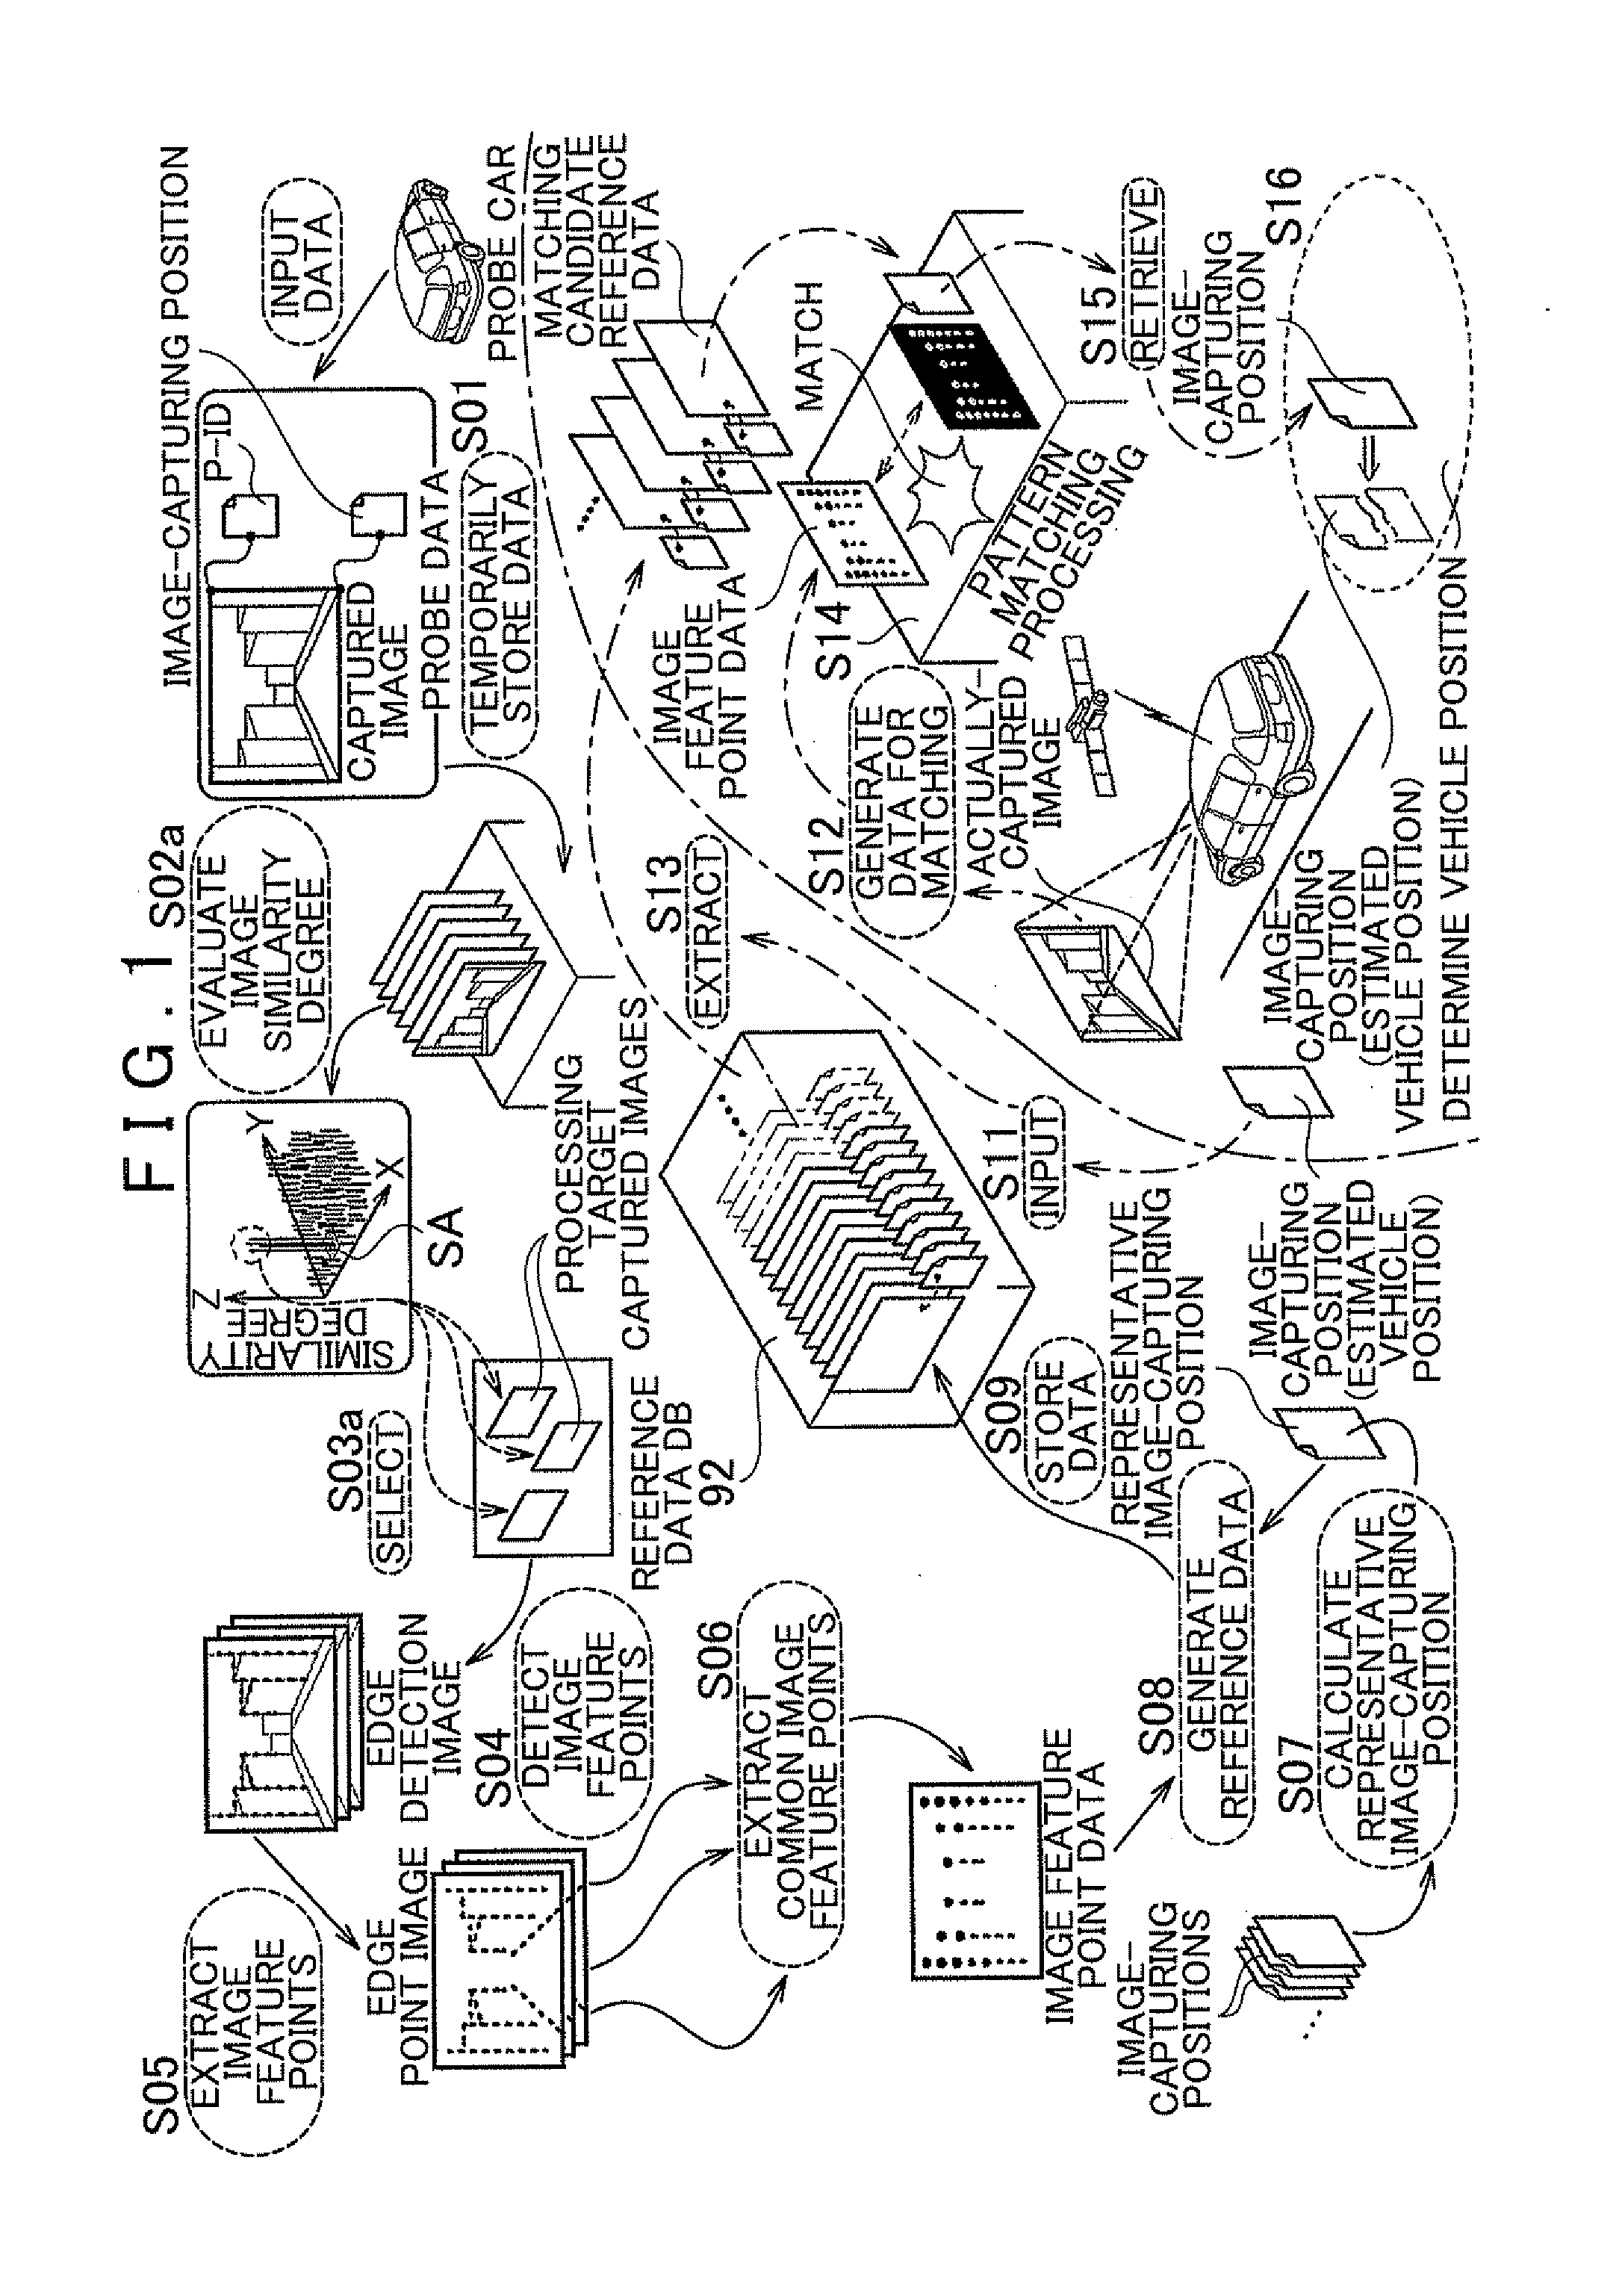 Scene matching reference data generation system and position measurement system